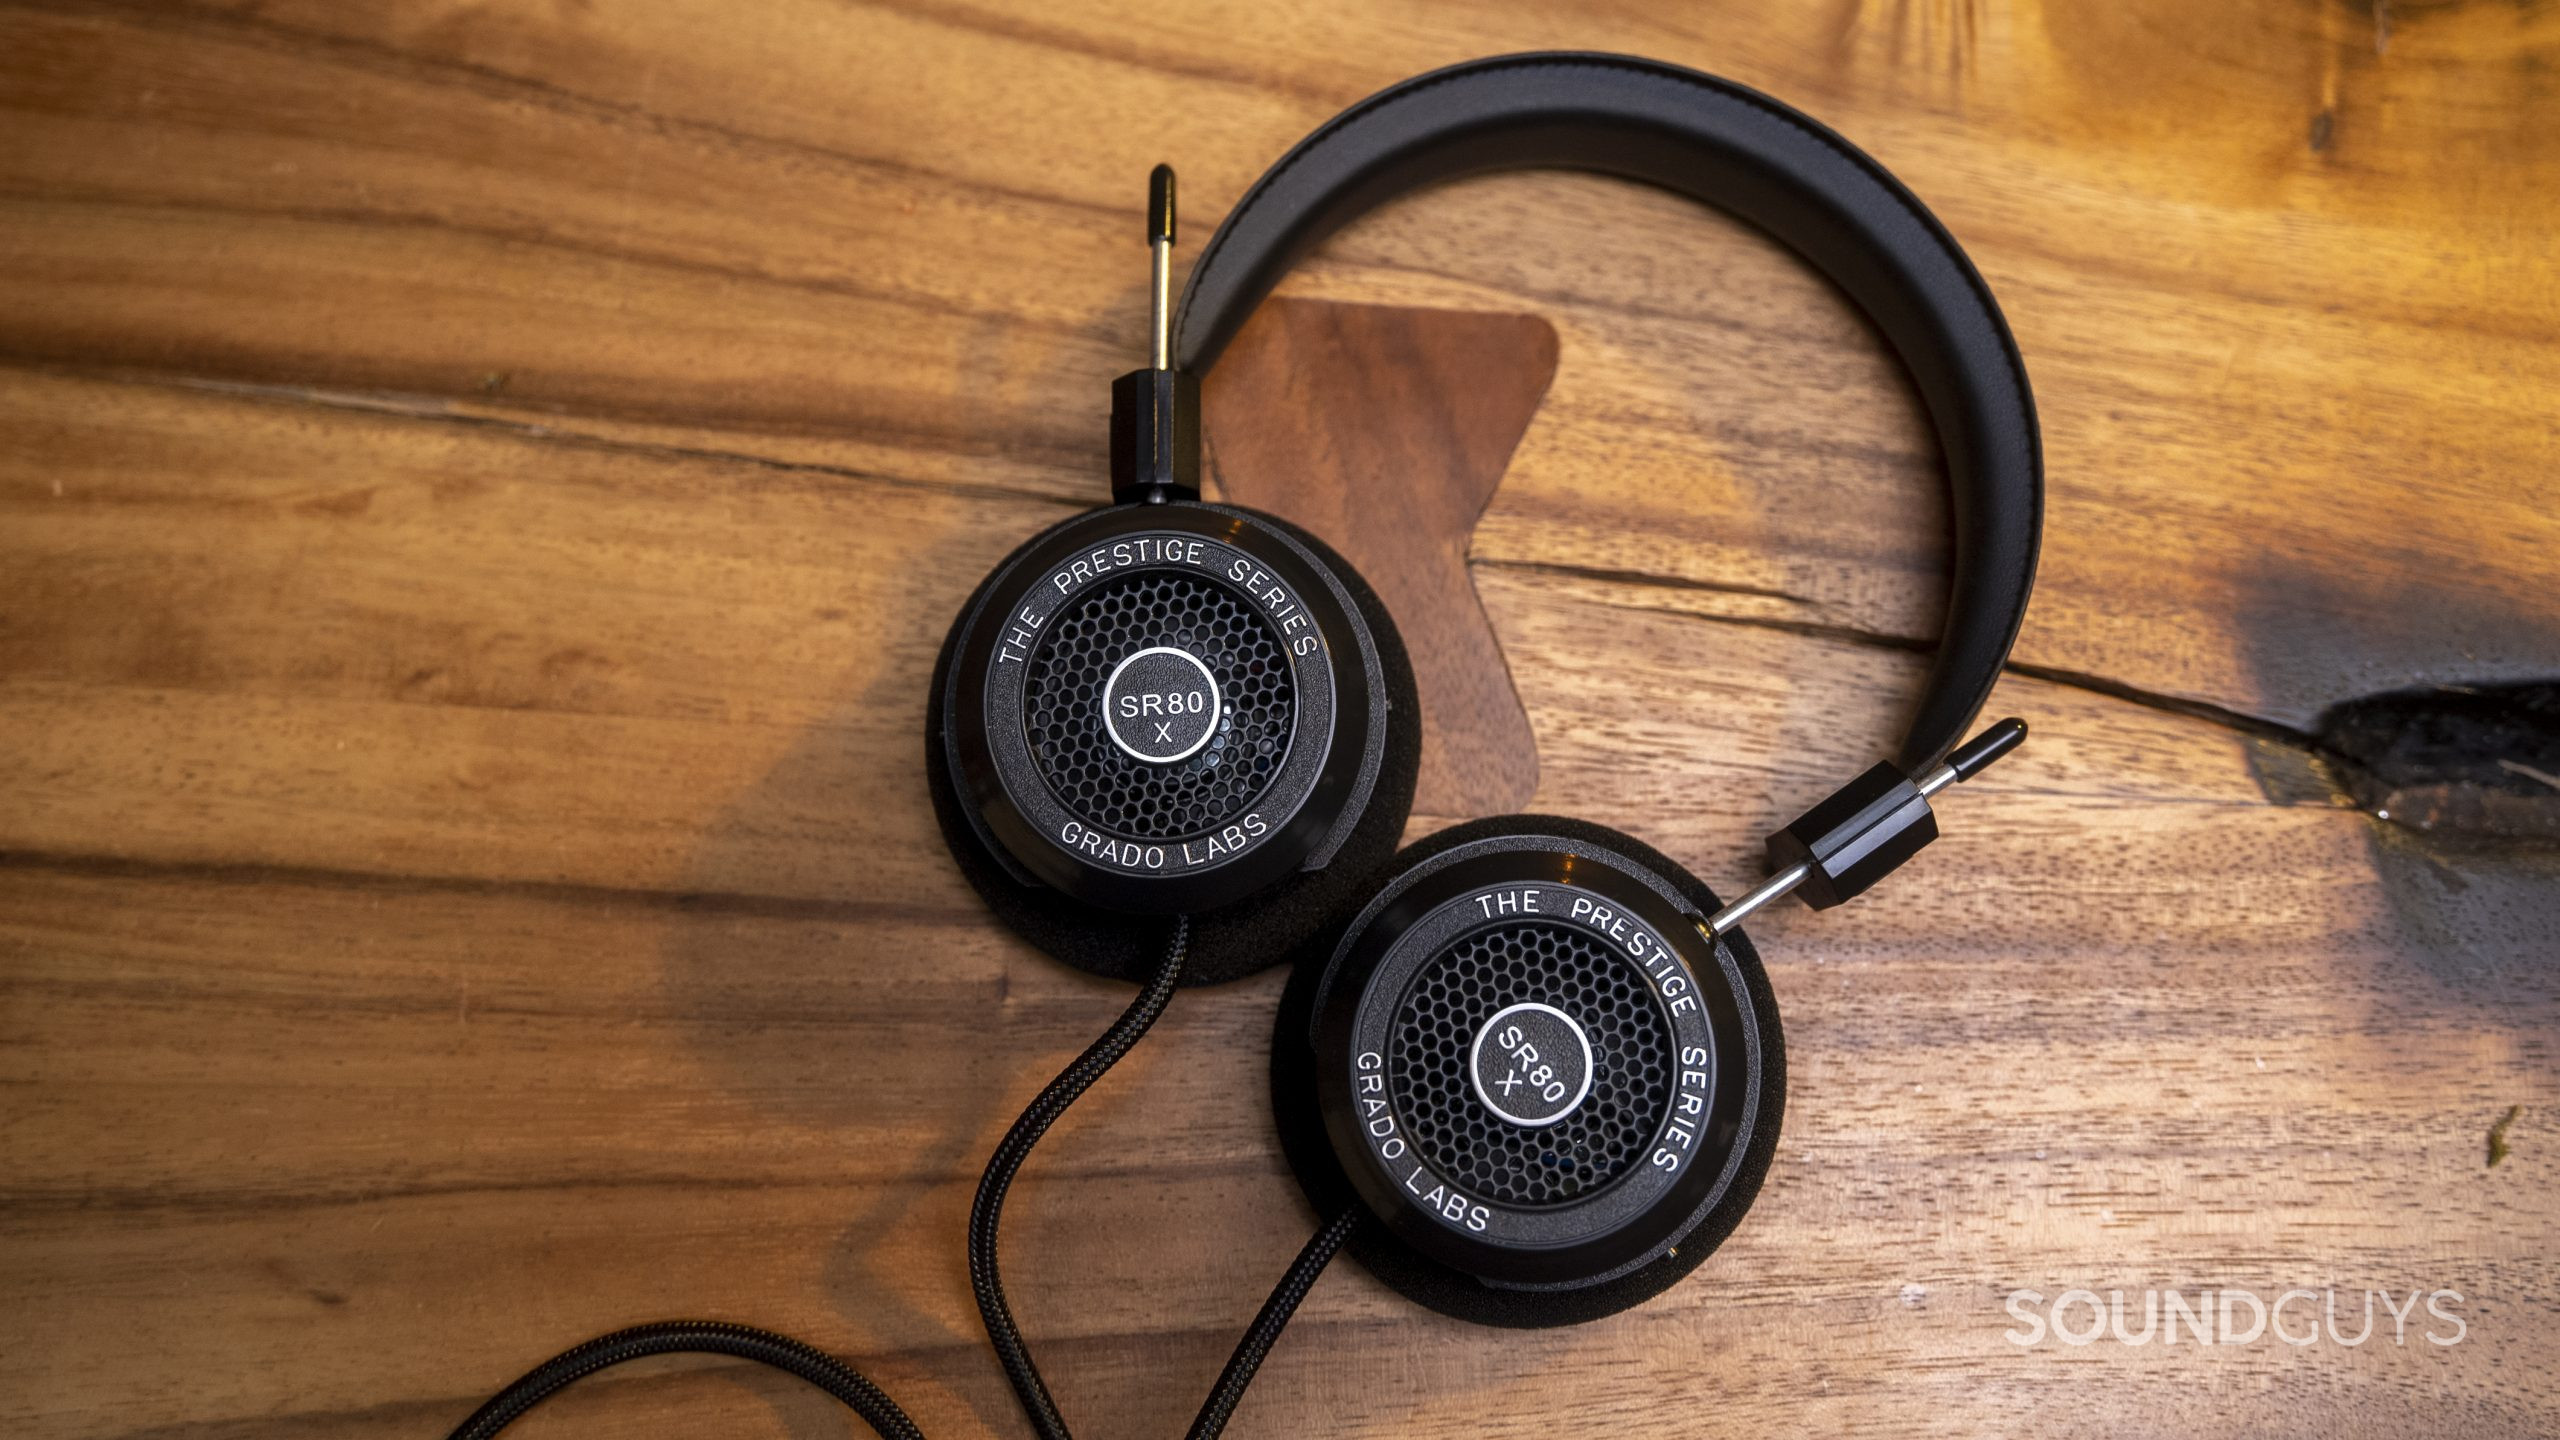 The Grado Labs SR80x flat lay on a wooden table.